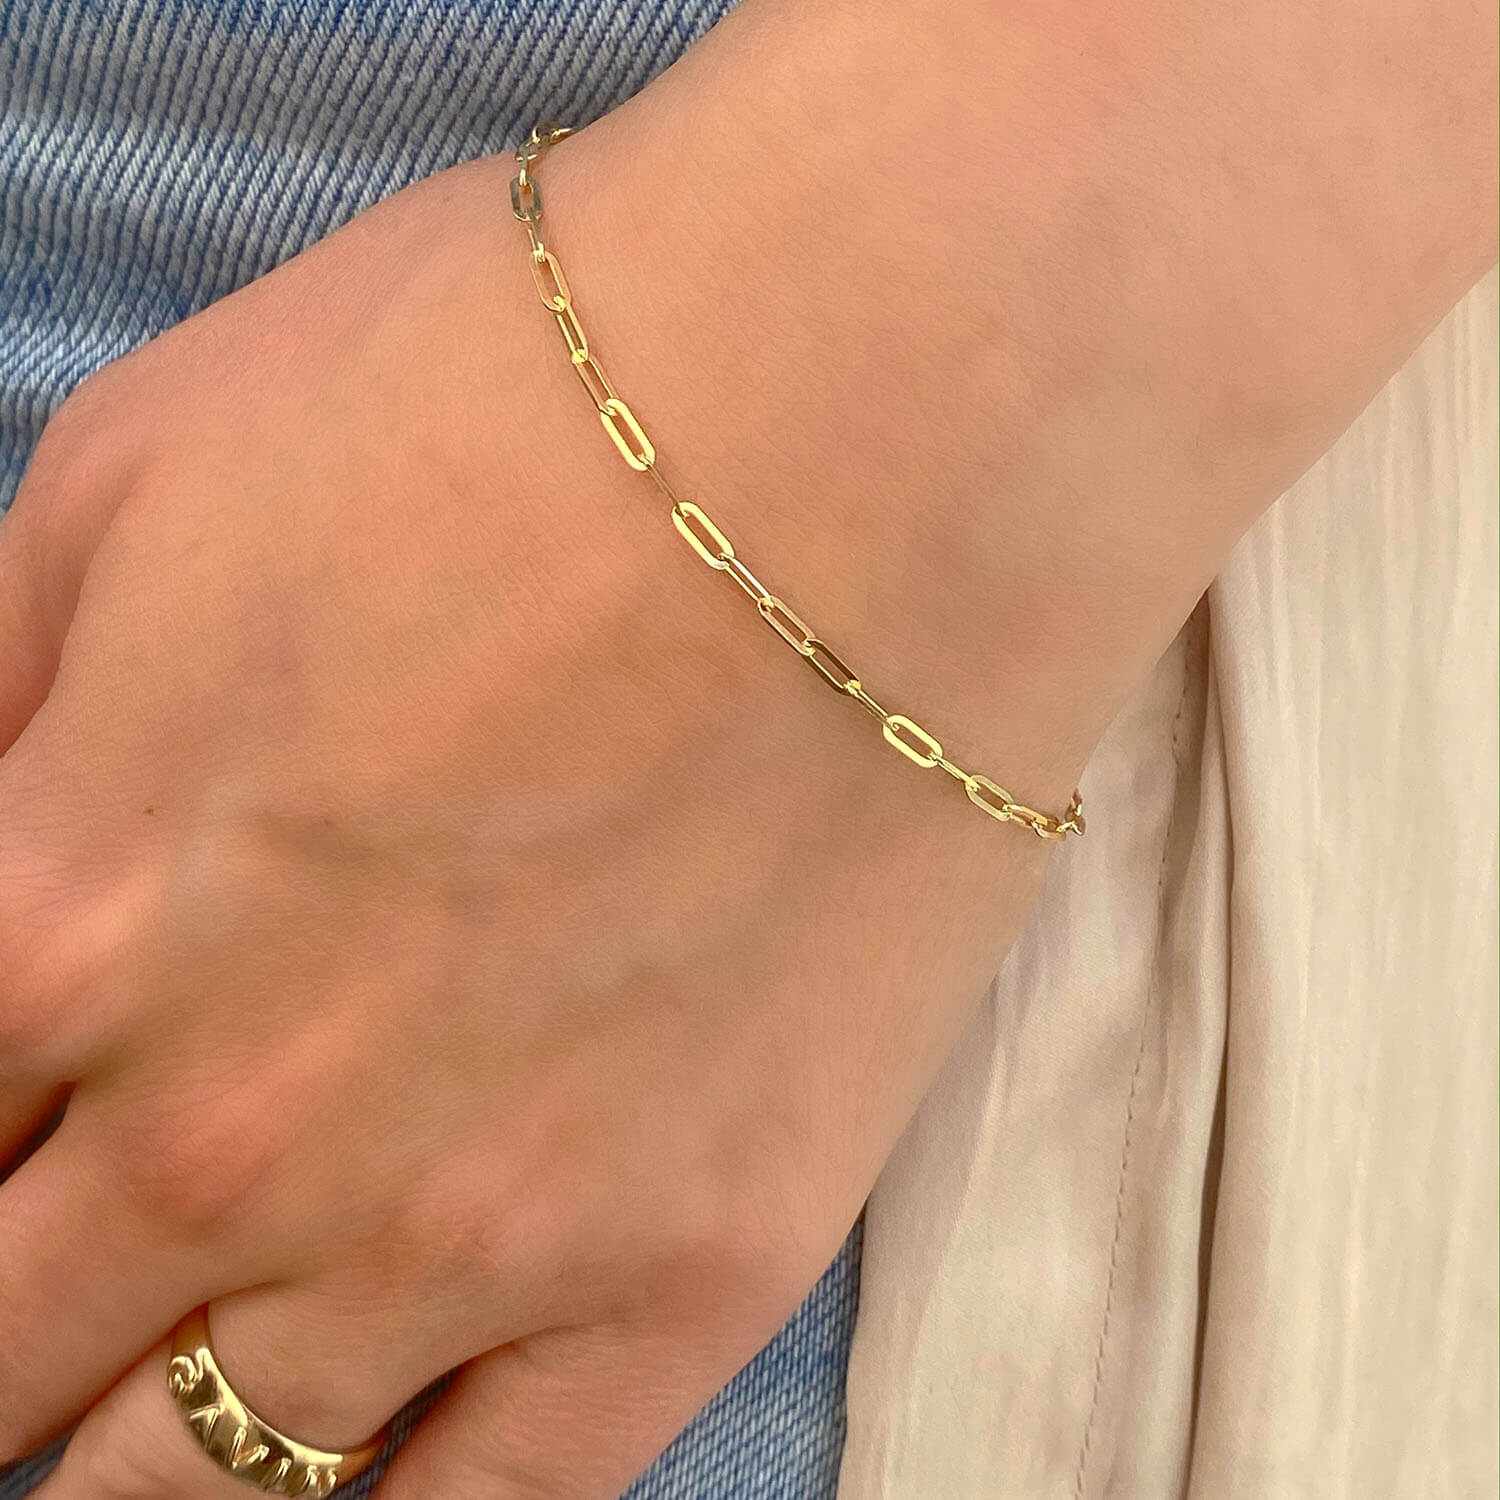 Ethlyn 2pcs/lot Adjustable Gold Color Baby Bangles &bracelets Birthday  Jewelry Best Gift For Girls Kids B154 - Bangles - AliExpress